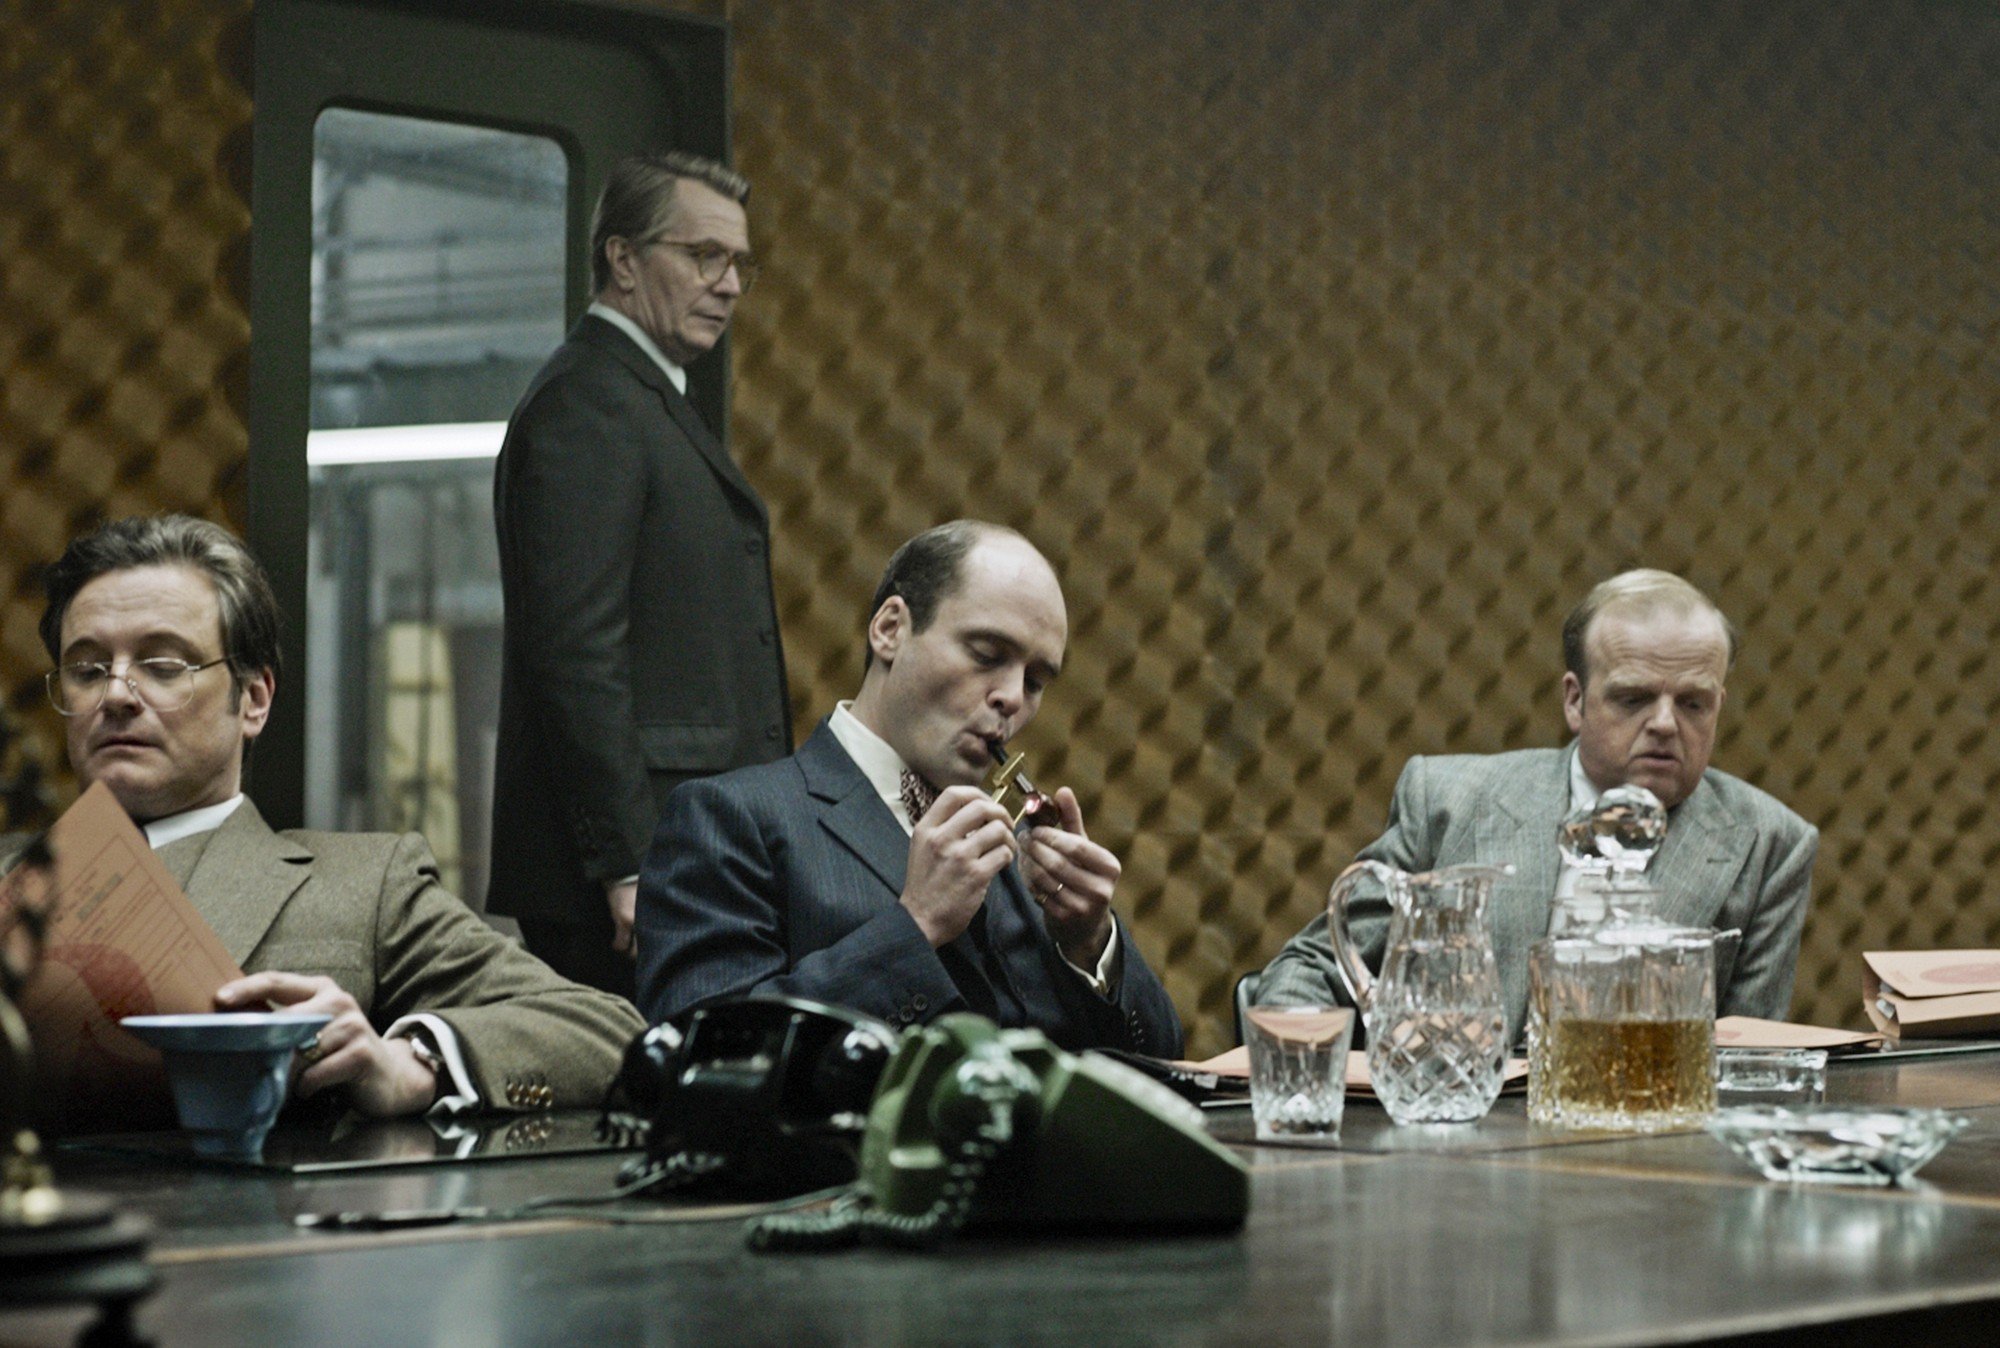 Colin Firth, Gary Oldman, David Dencik and Toby Jones in Focus Features' Tinker, Tailor, Soldier, Spy (2011)